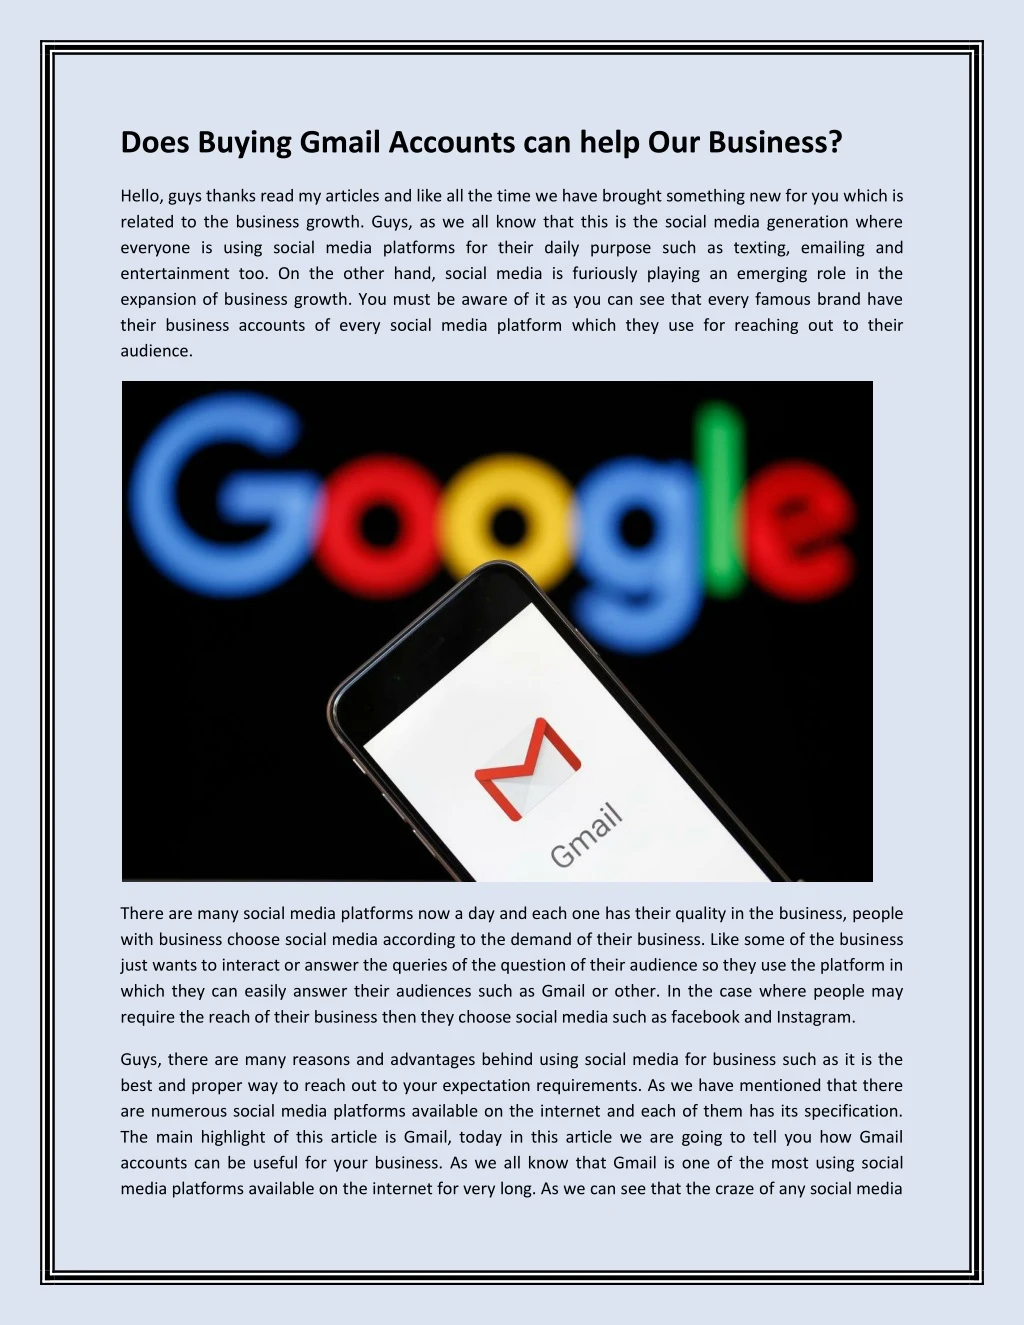 does buying gmail accounts can help our business